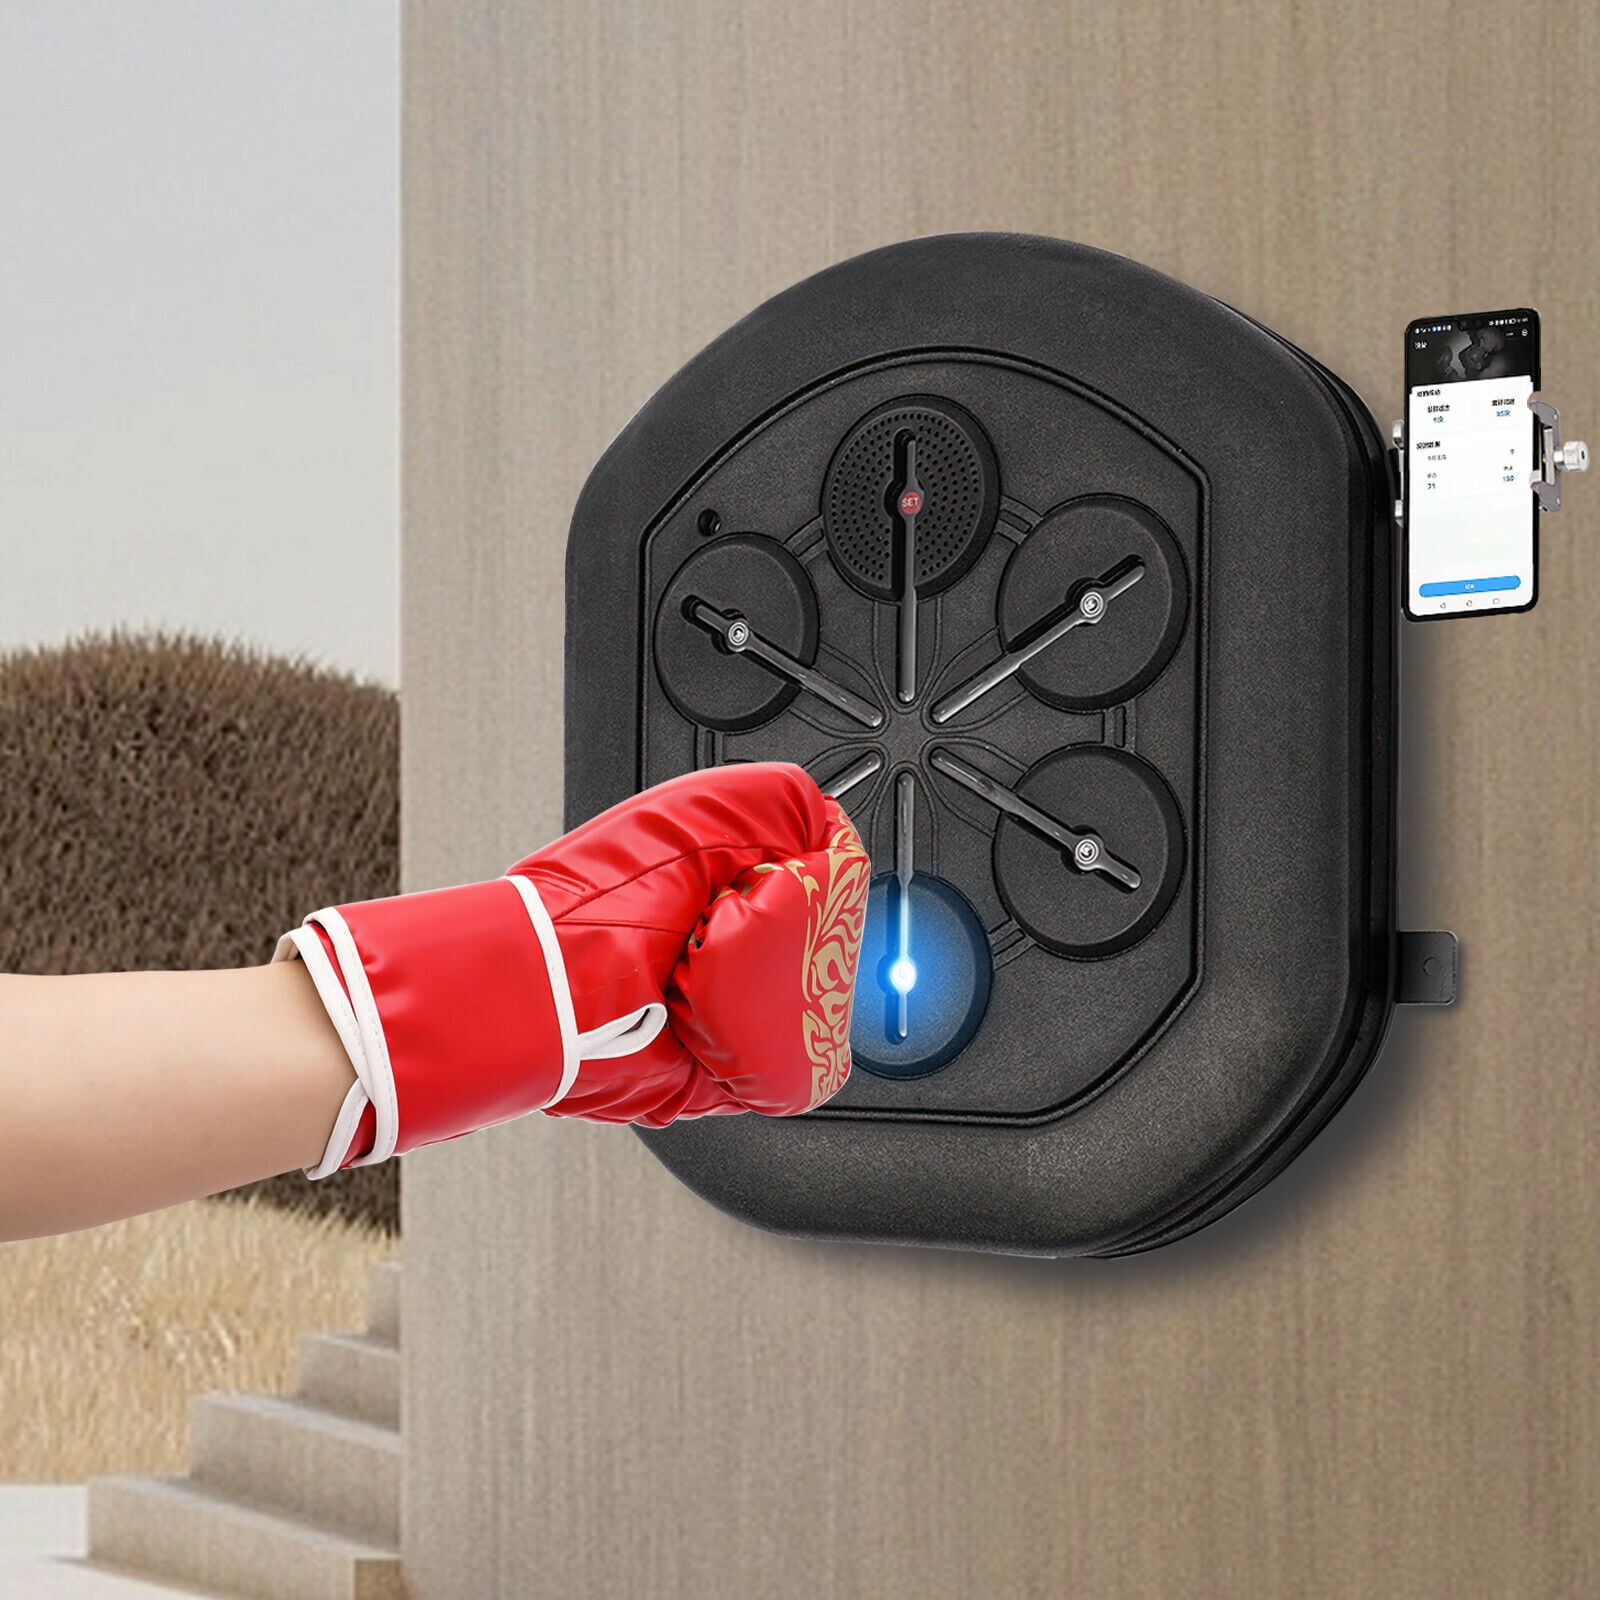 MEIMAI Boxing Machine Wall Mounted, Smart Music Boxing Machine with LED,  Electronic Punching Machine with Phone Holder & Boxing Gloves for Home